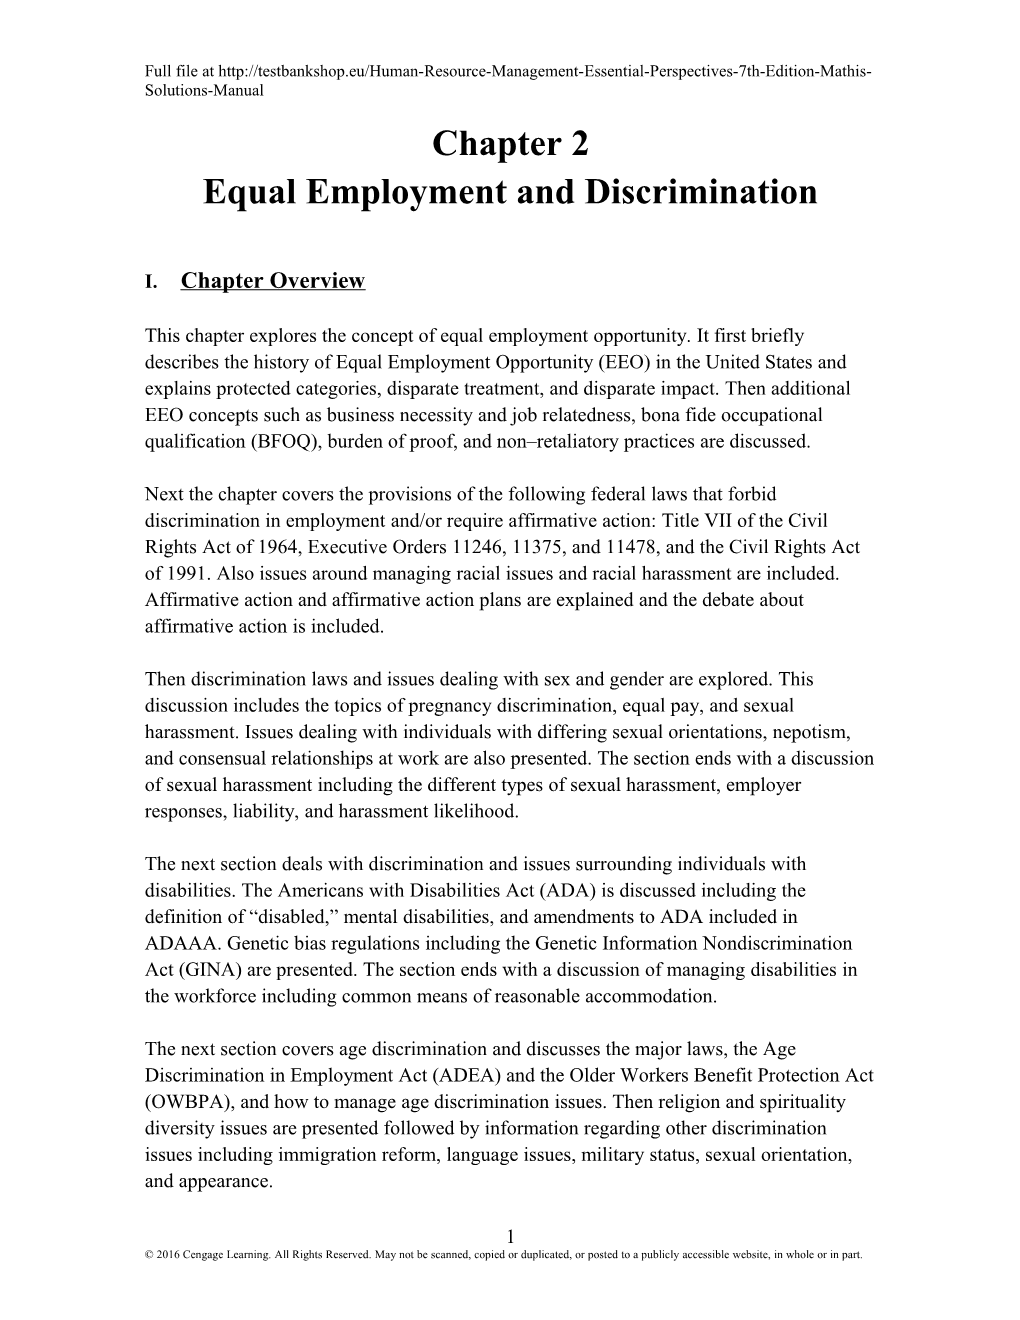 Equal Employment and Discrimination